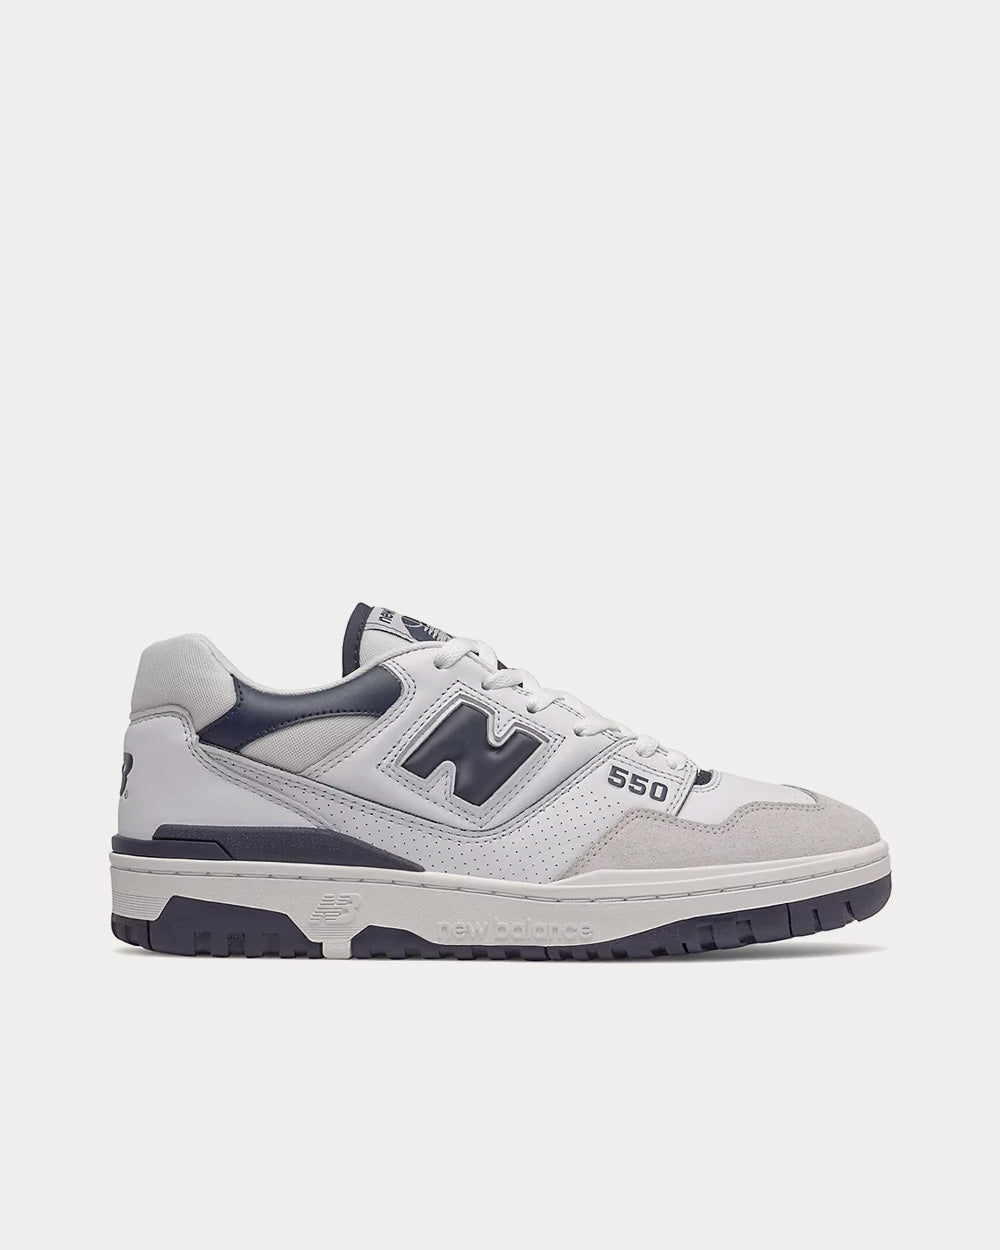 New Balance - 550 White with Team Navy Low Top Sneakers